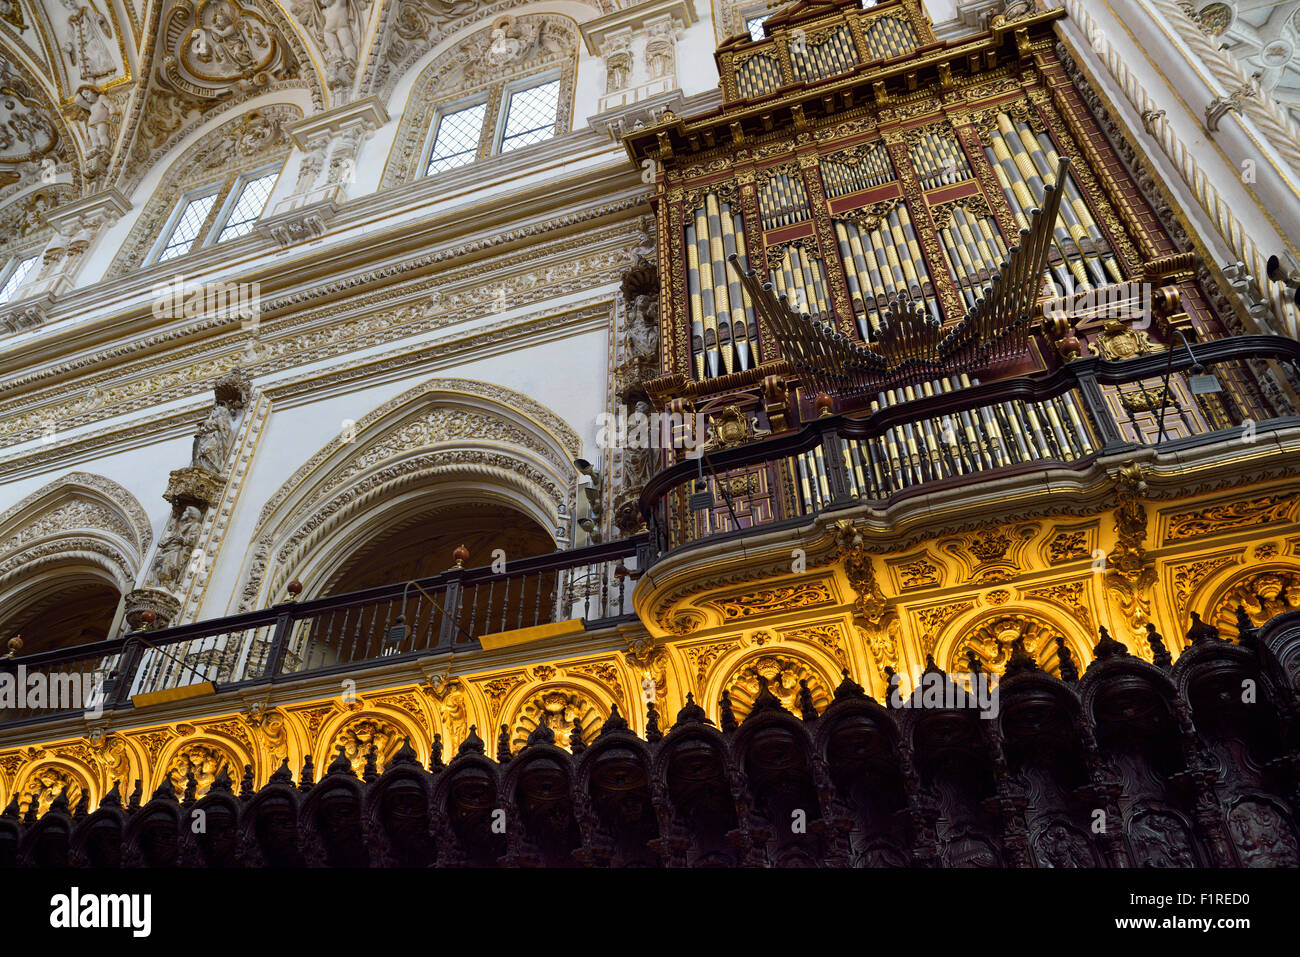 Pipe organ and baroque carved mahogany seats in the choir of Cordoba Cathedral Mosque Stock Photo